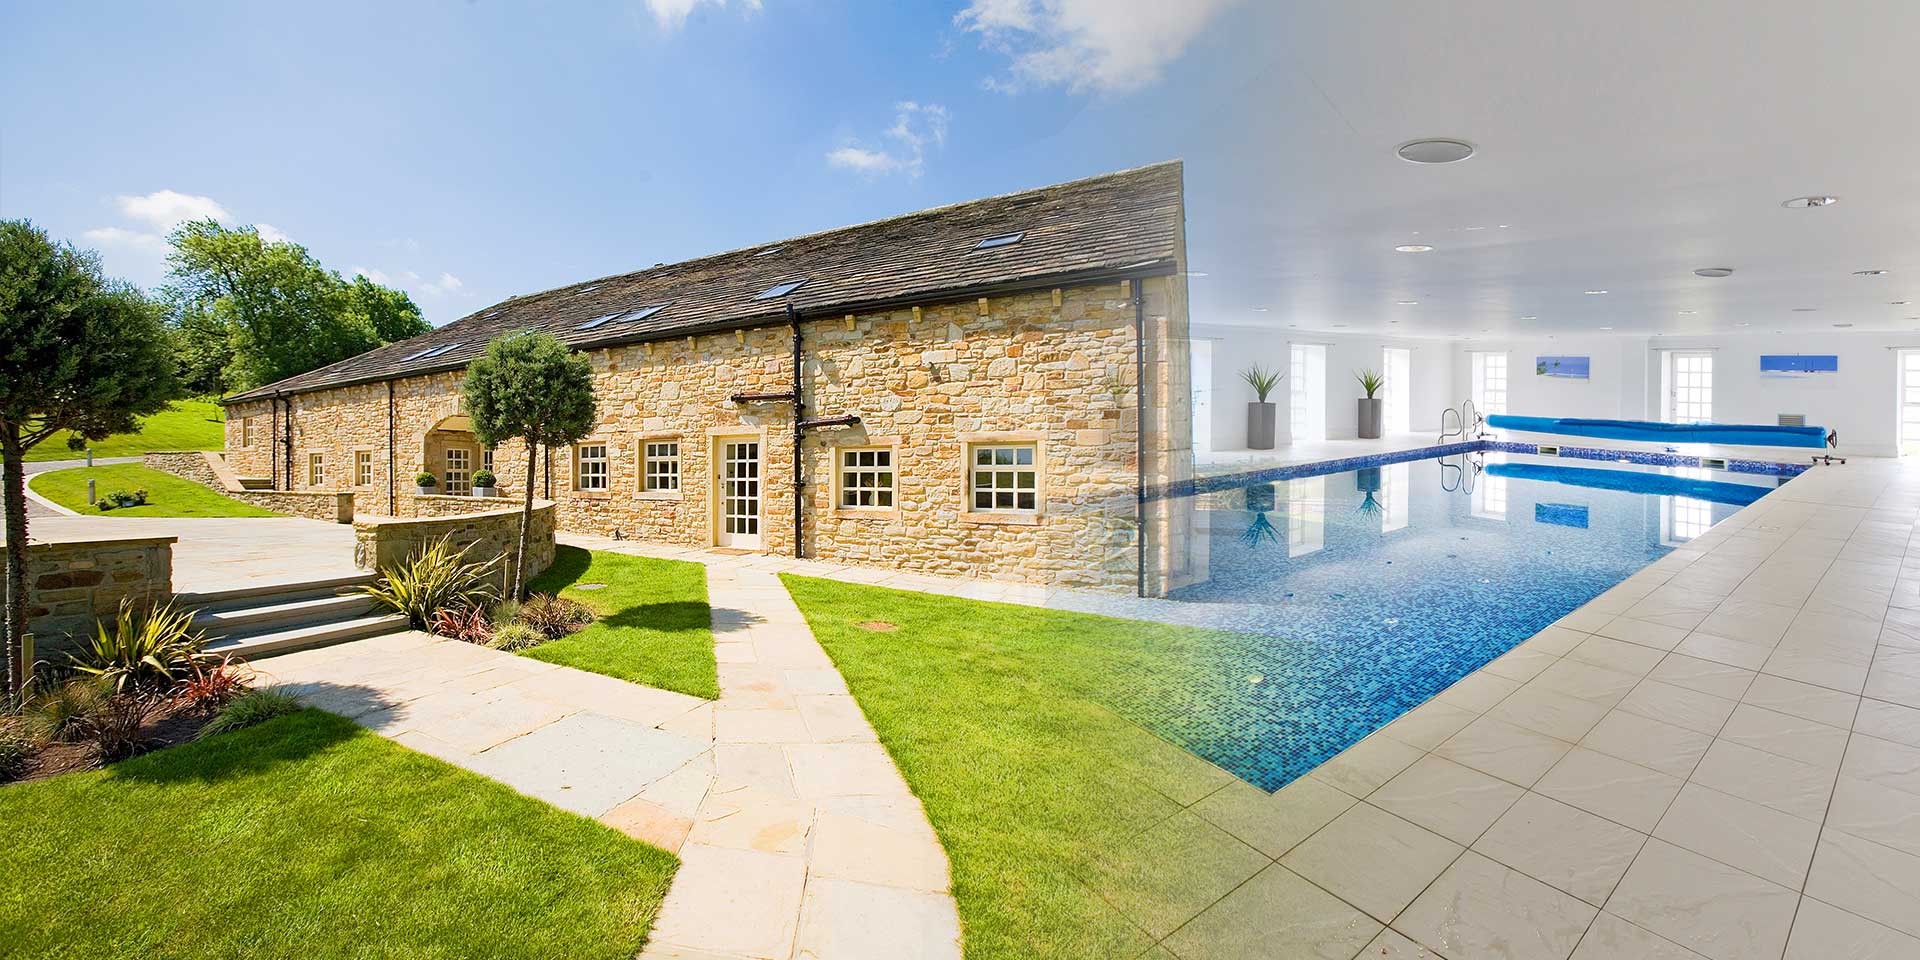 Brand New House The Pool Party Barn Celebration Cottages